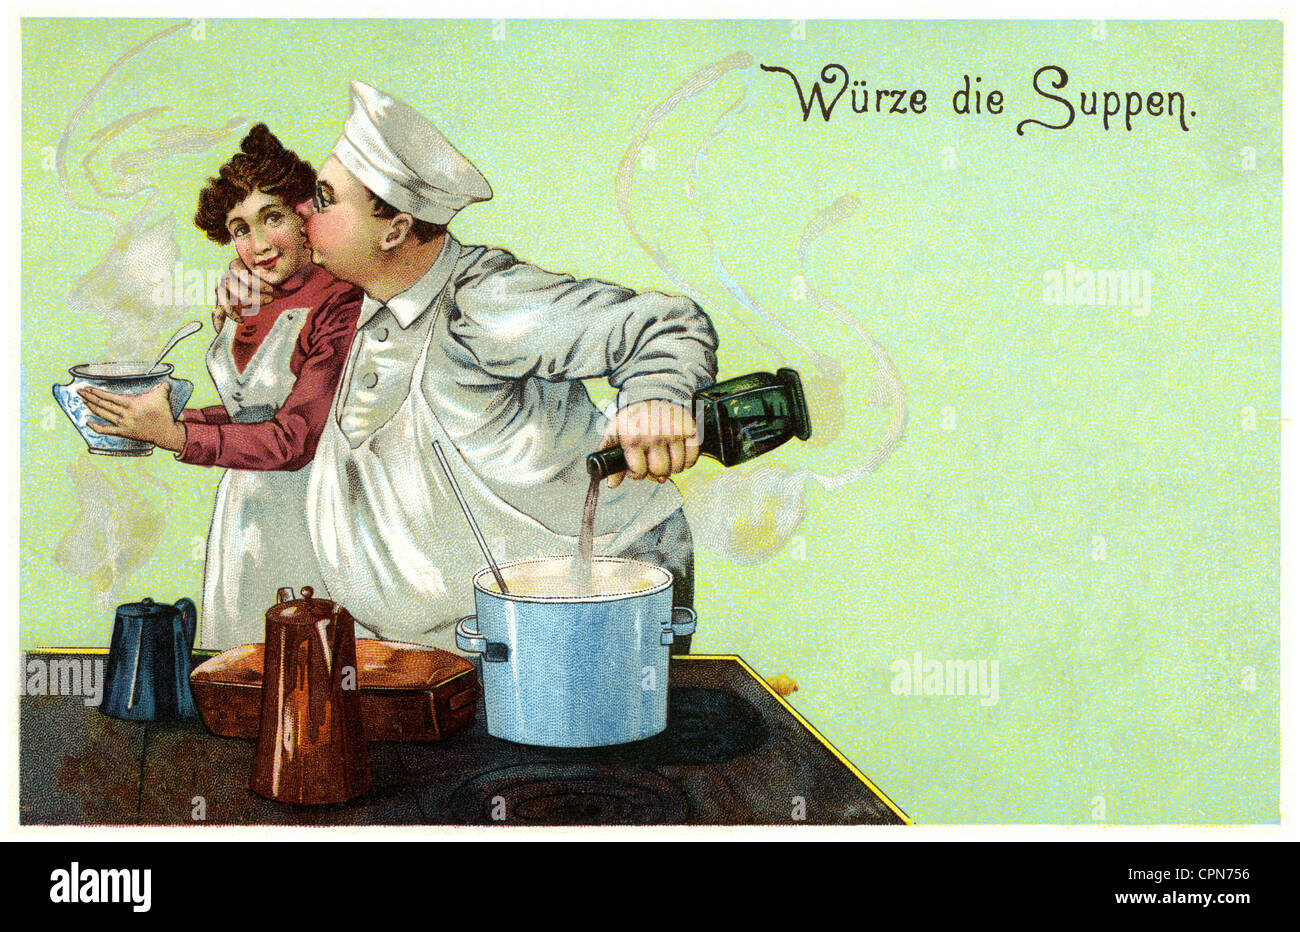 household, cook, cook kissing cooky, saying: 'Wuerze die Suppen' (Flavour the soup), lithograph, Germany, 1902, Additional-Rights-Clearences-Not Available Stock Photo